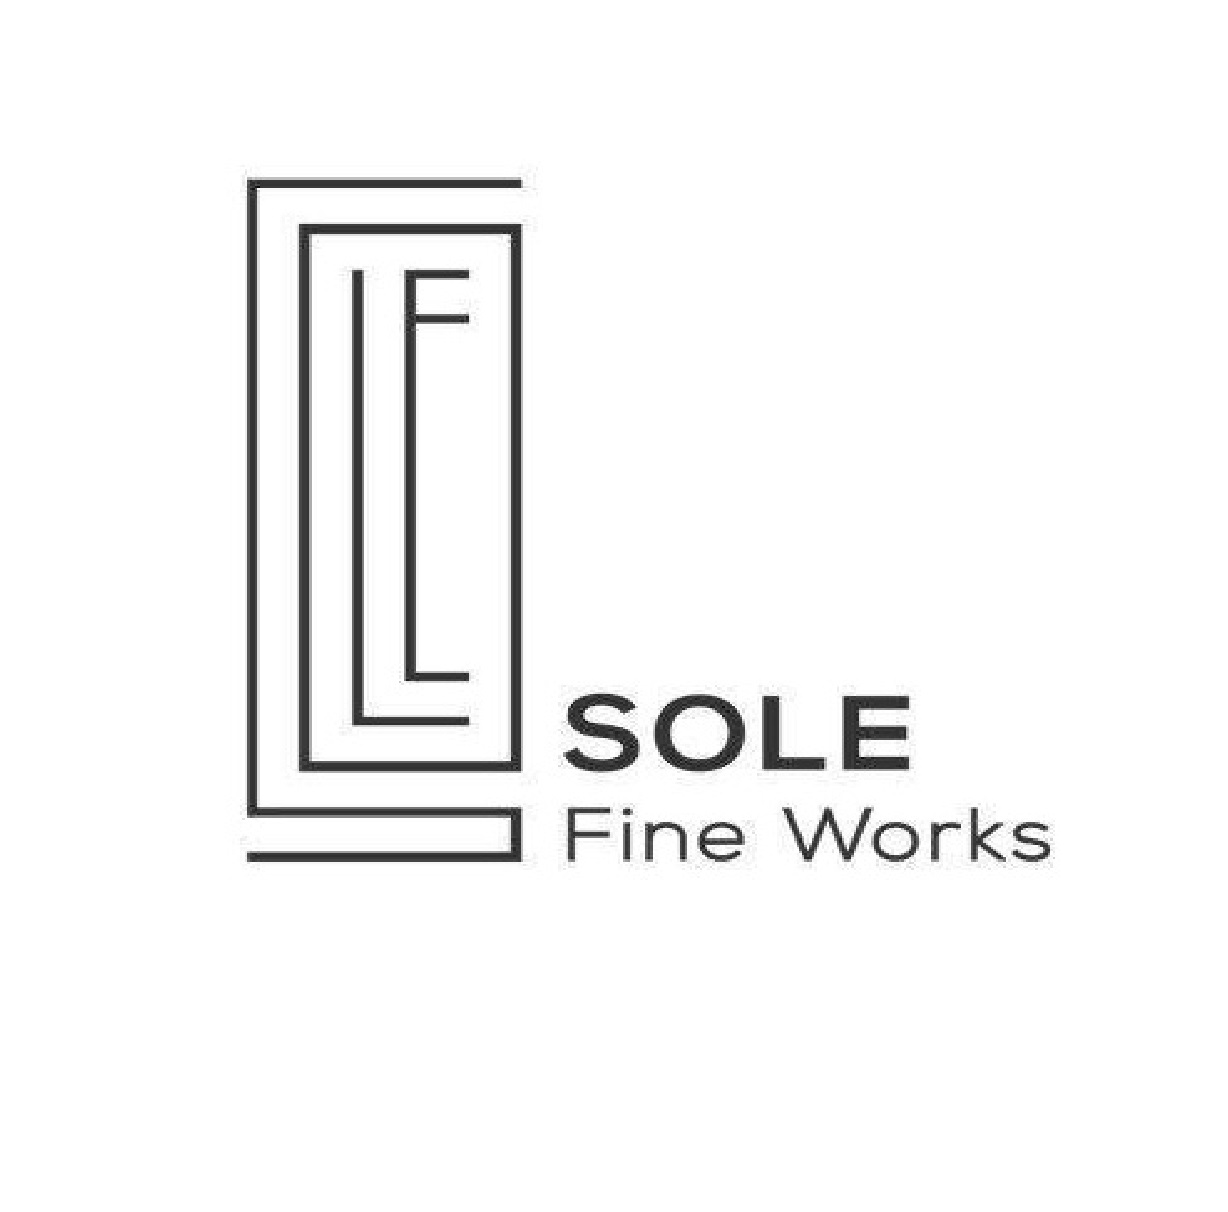 Sole fine works